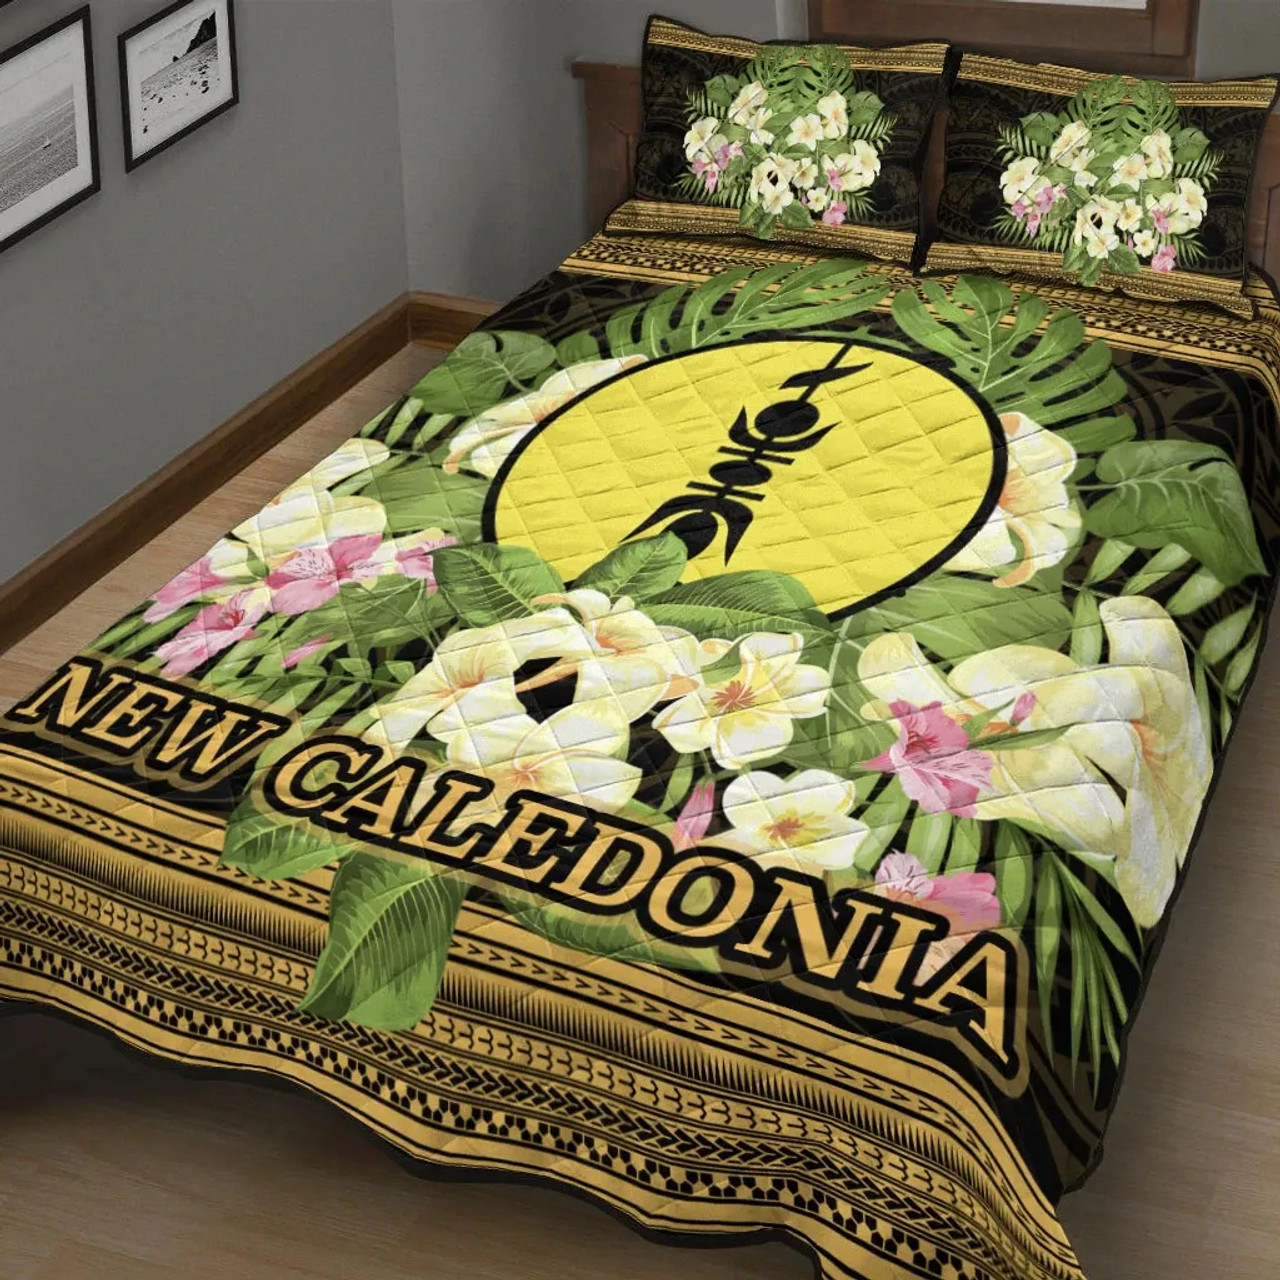 New Caledonia Quilt Bed Set - Polynesian Gold Patterns Collection 2